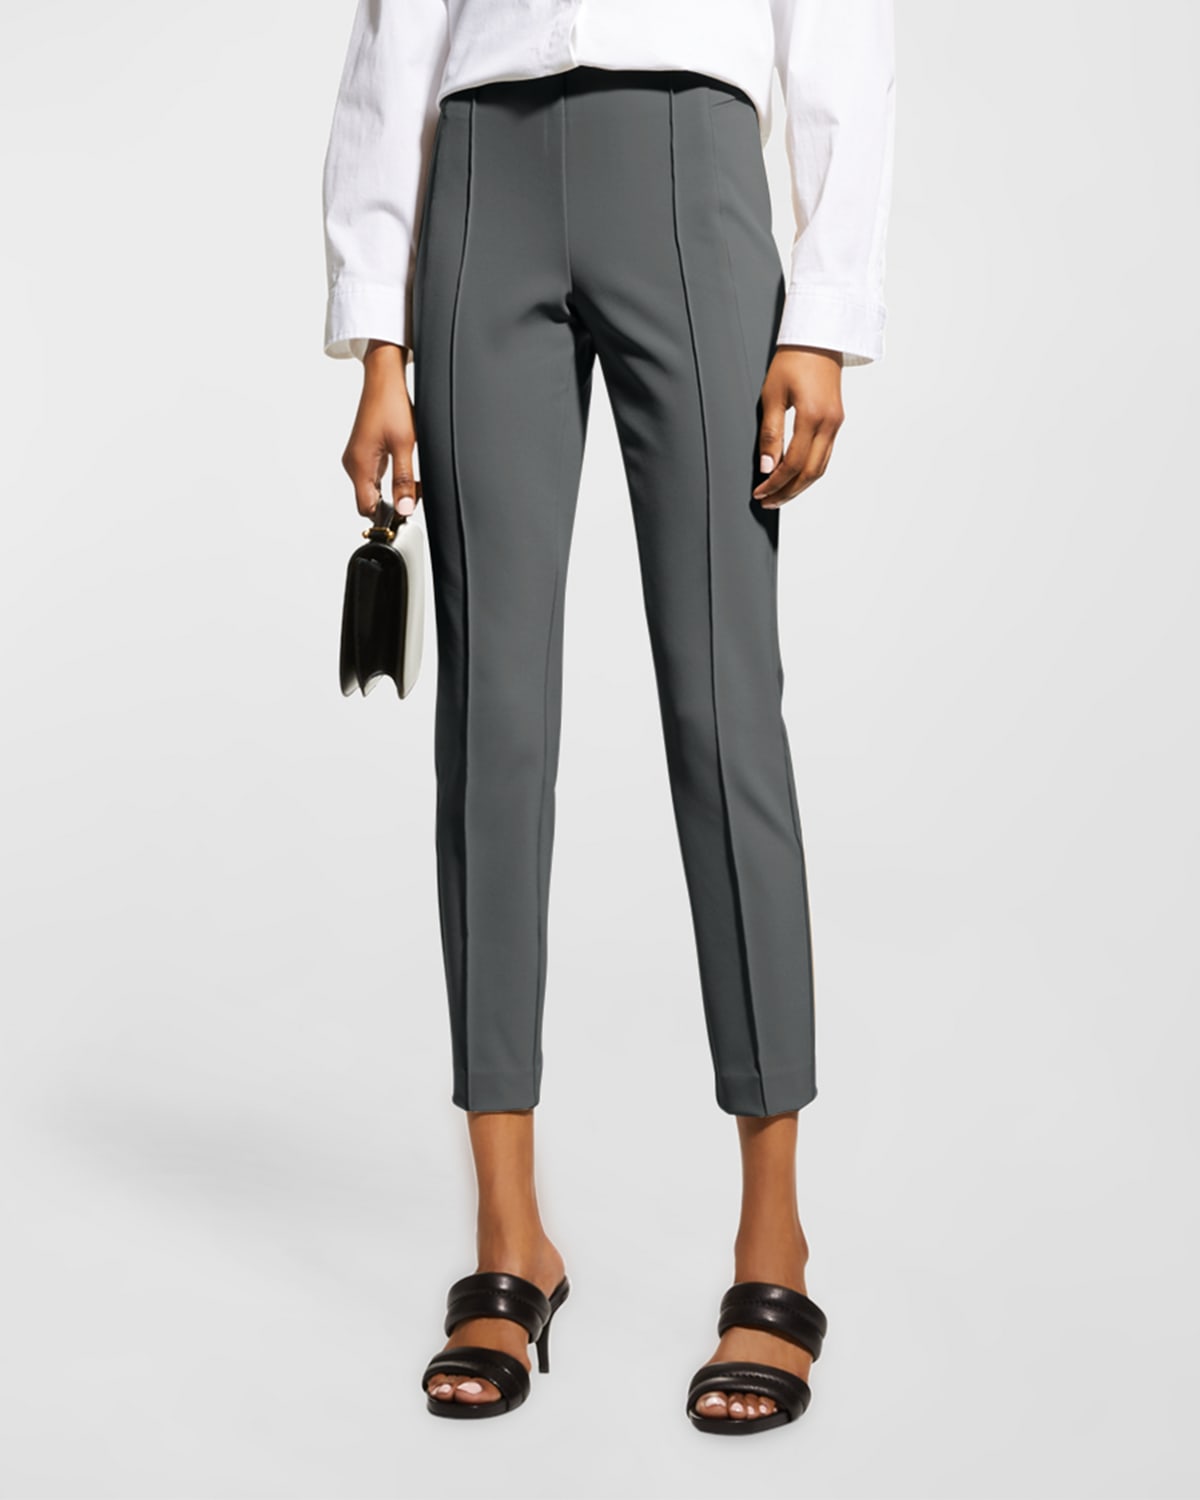 Lafayette 148 Petite Gramercy Acclaimed Stretch Pants In Shale